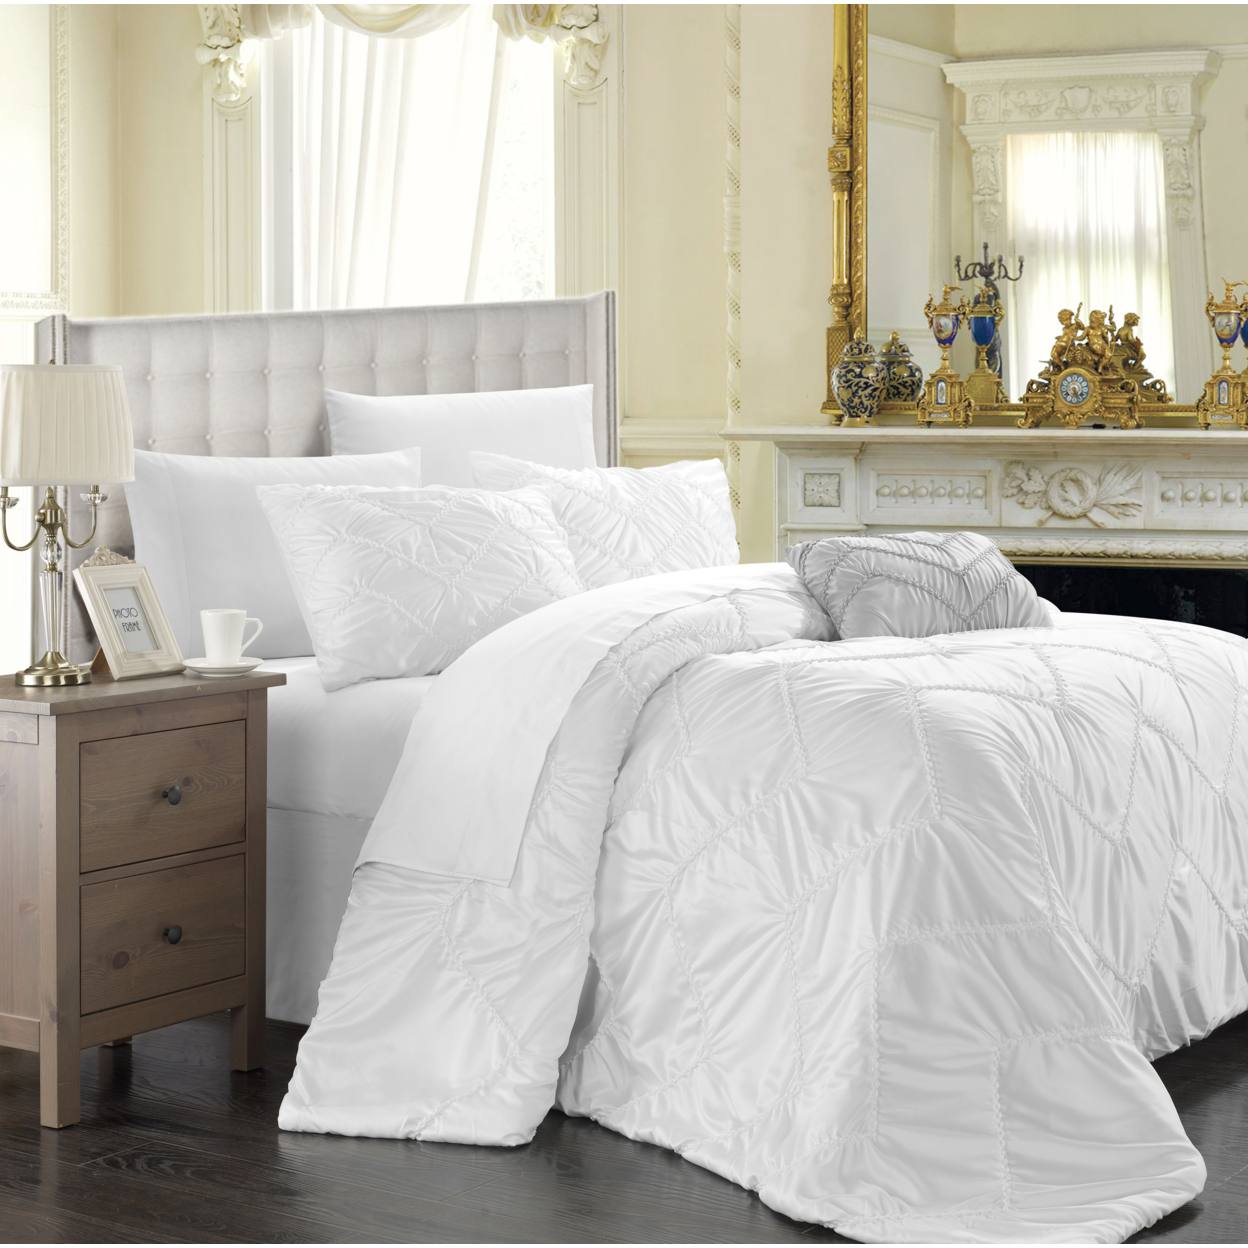 Chic Home Ella 5-piece Comforter Set, Shams, Bed Skirt And Decorative Pillow Included - Champagne, King